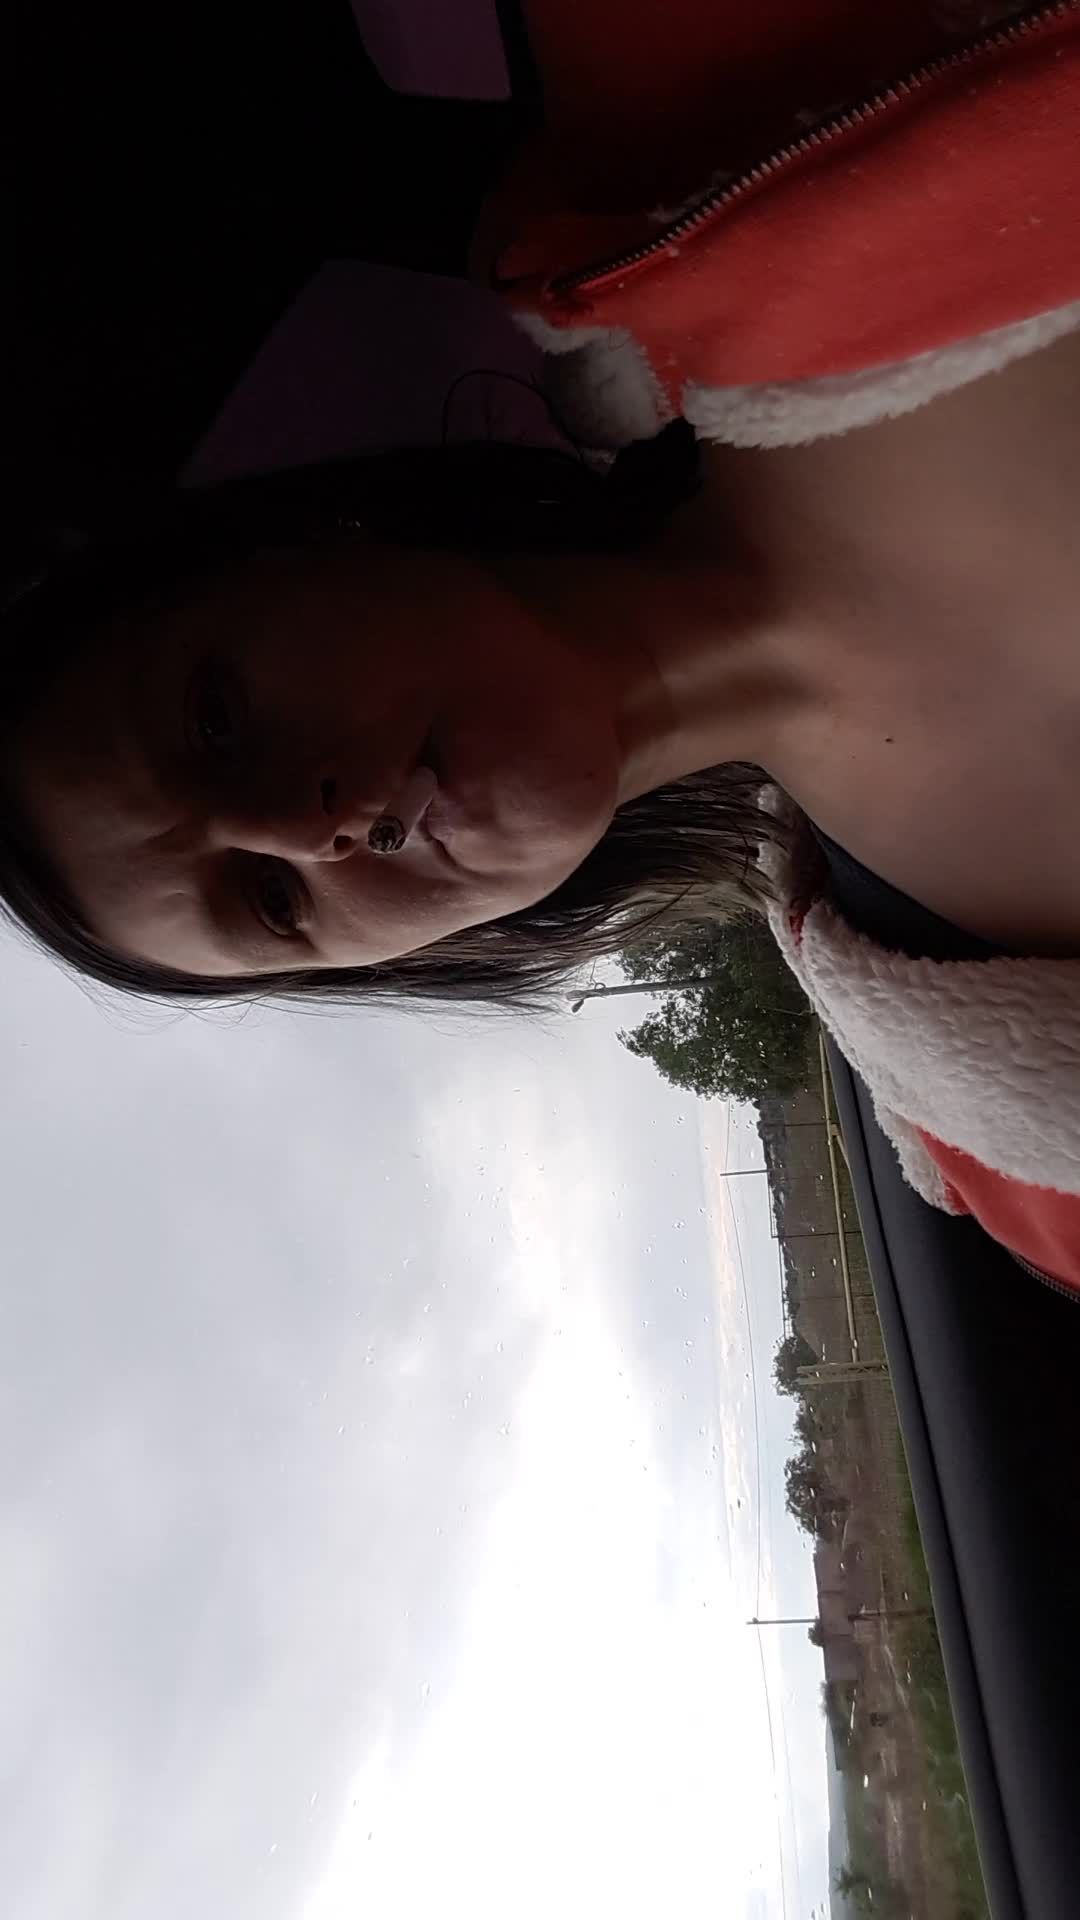 smoke in car with boobs out :D